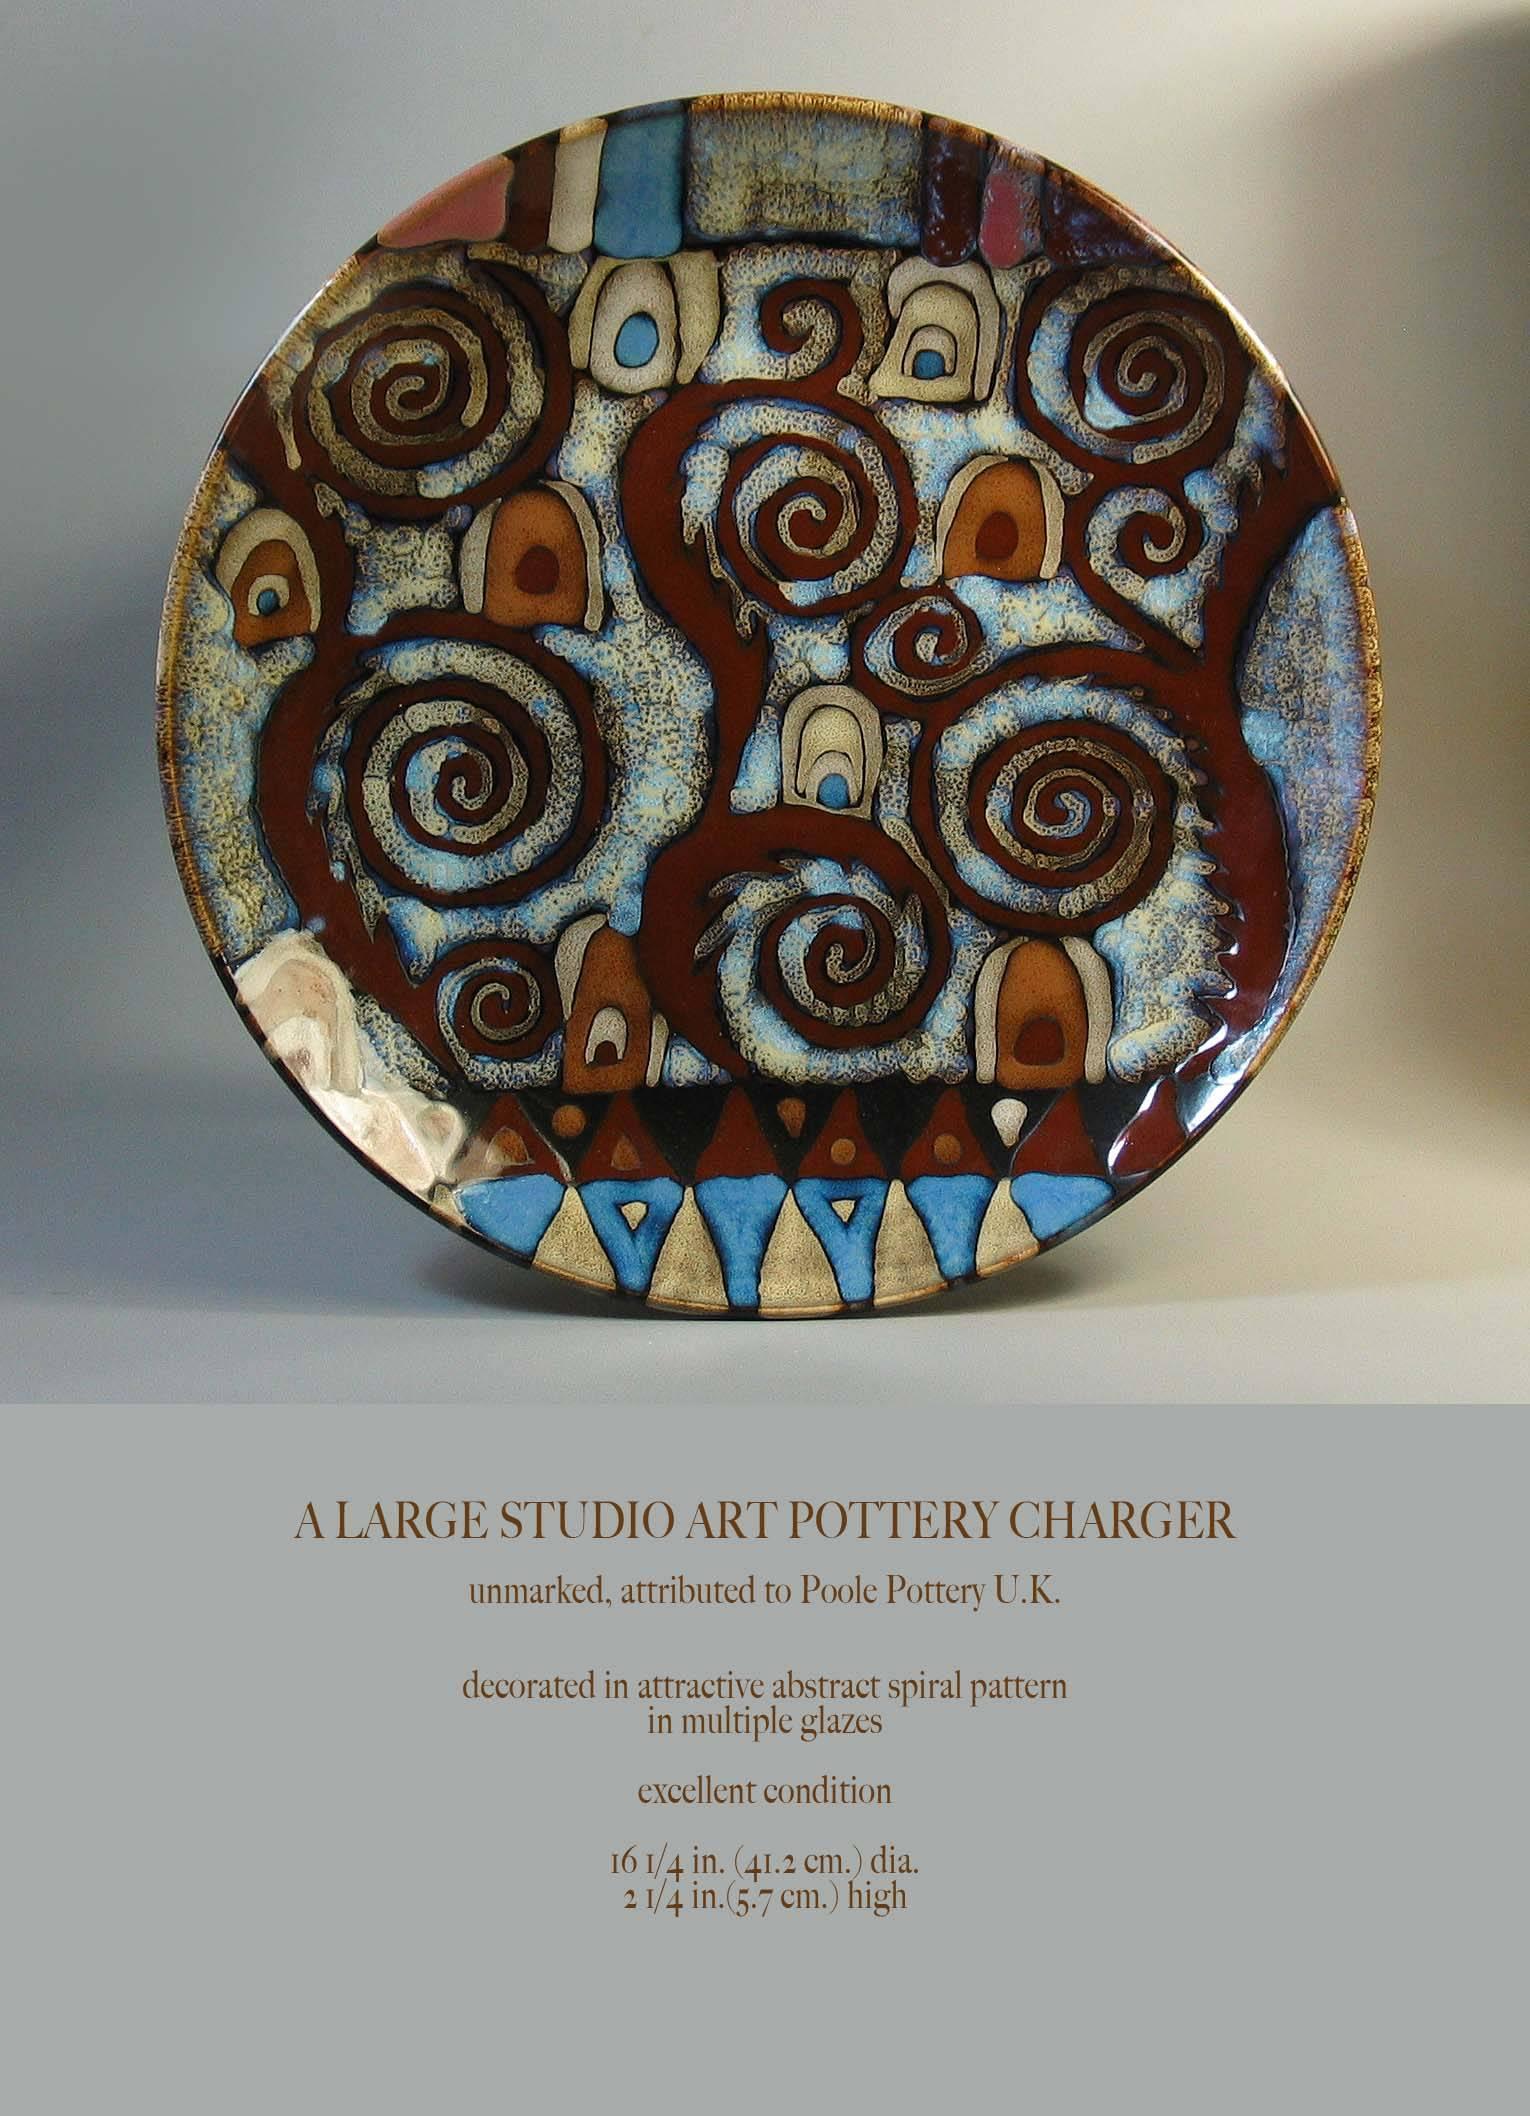 A large Abstract Studio Art Pottery charger, unmarked, attributed to Poole Pottery U.K. Decorated in attractive an abstract spiral pattern in multiple glazes, excellent condition. The charger measures 16 1/4